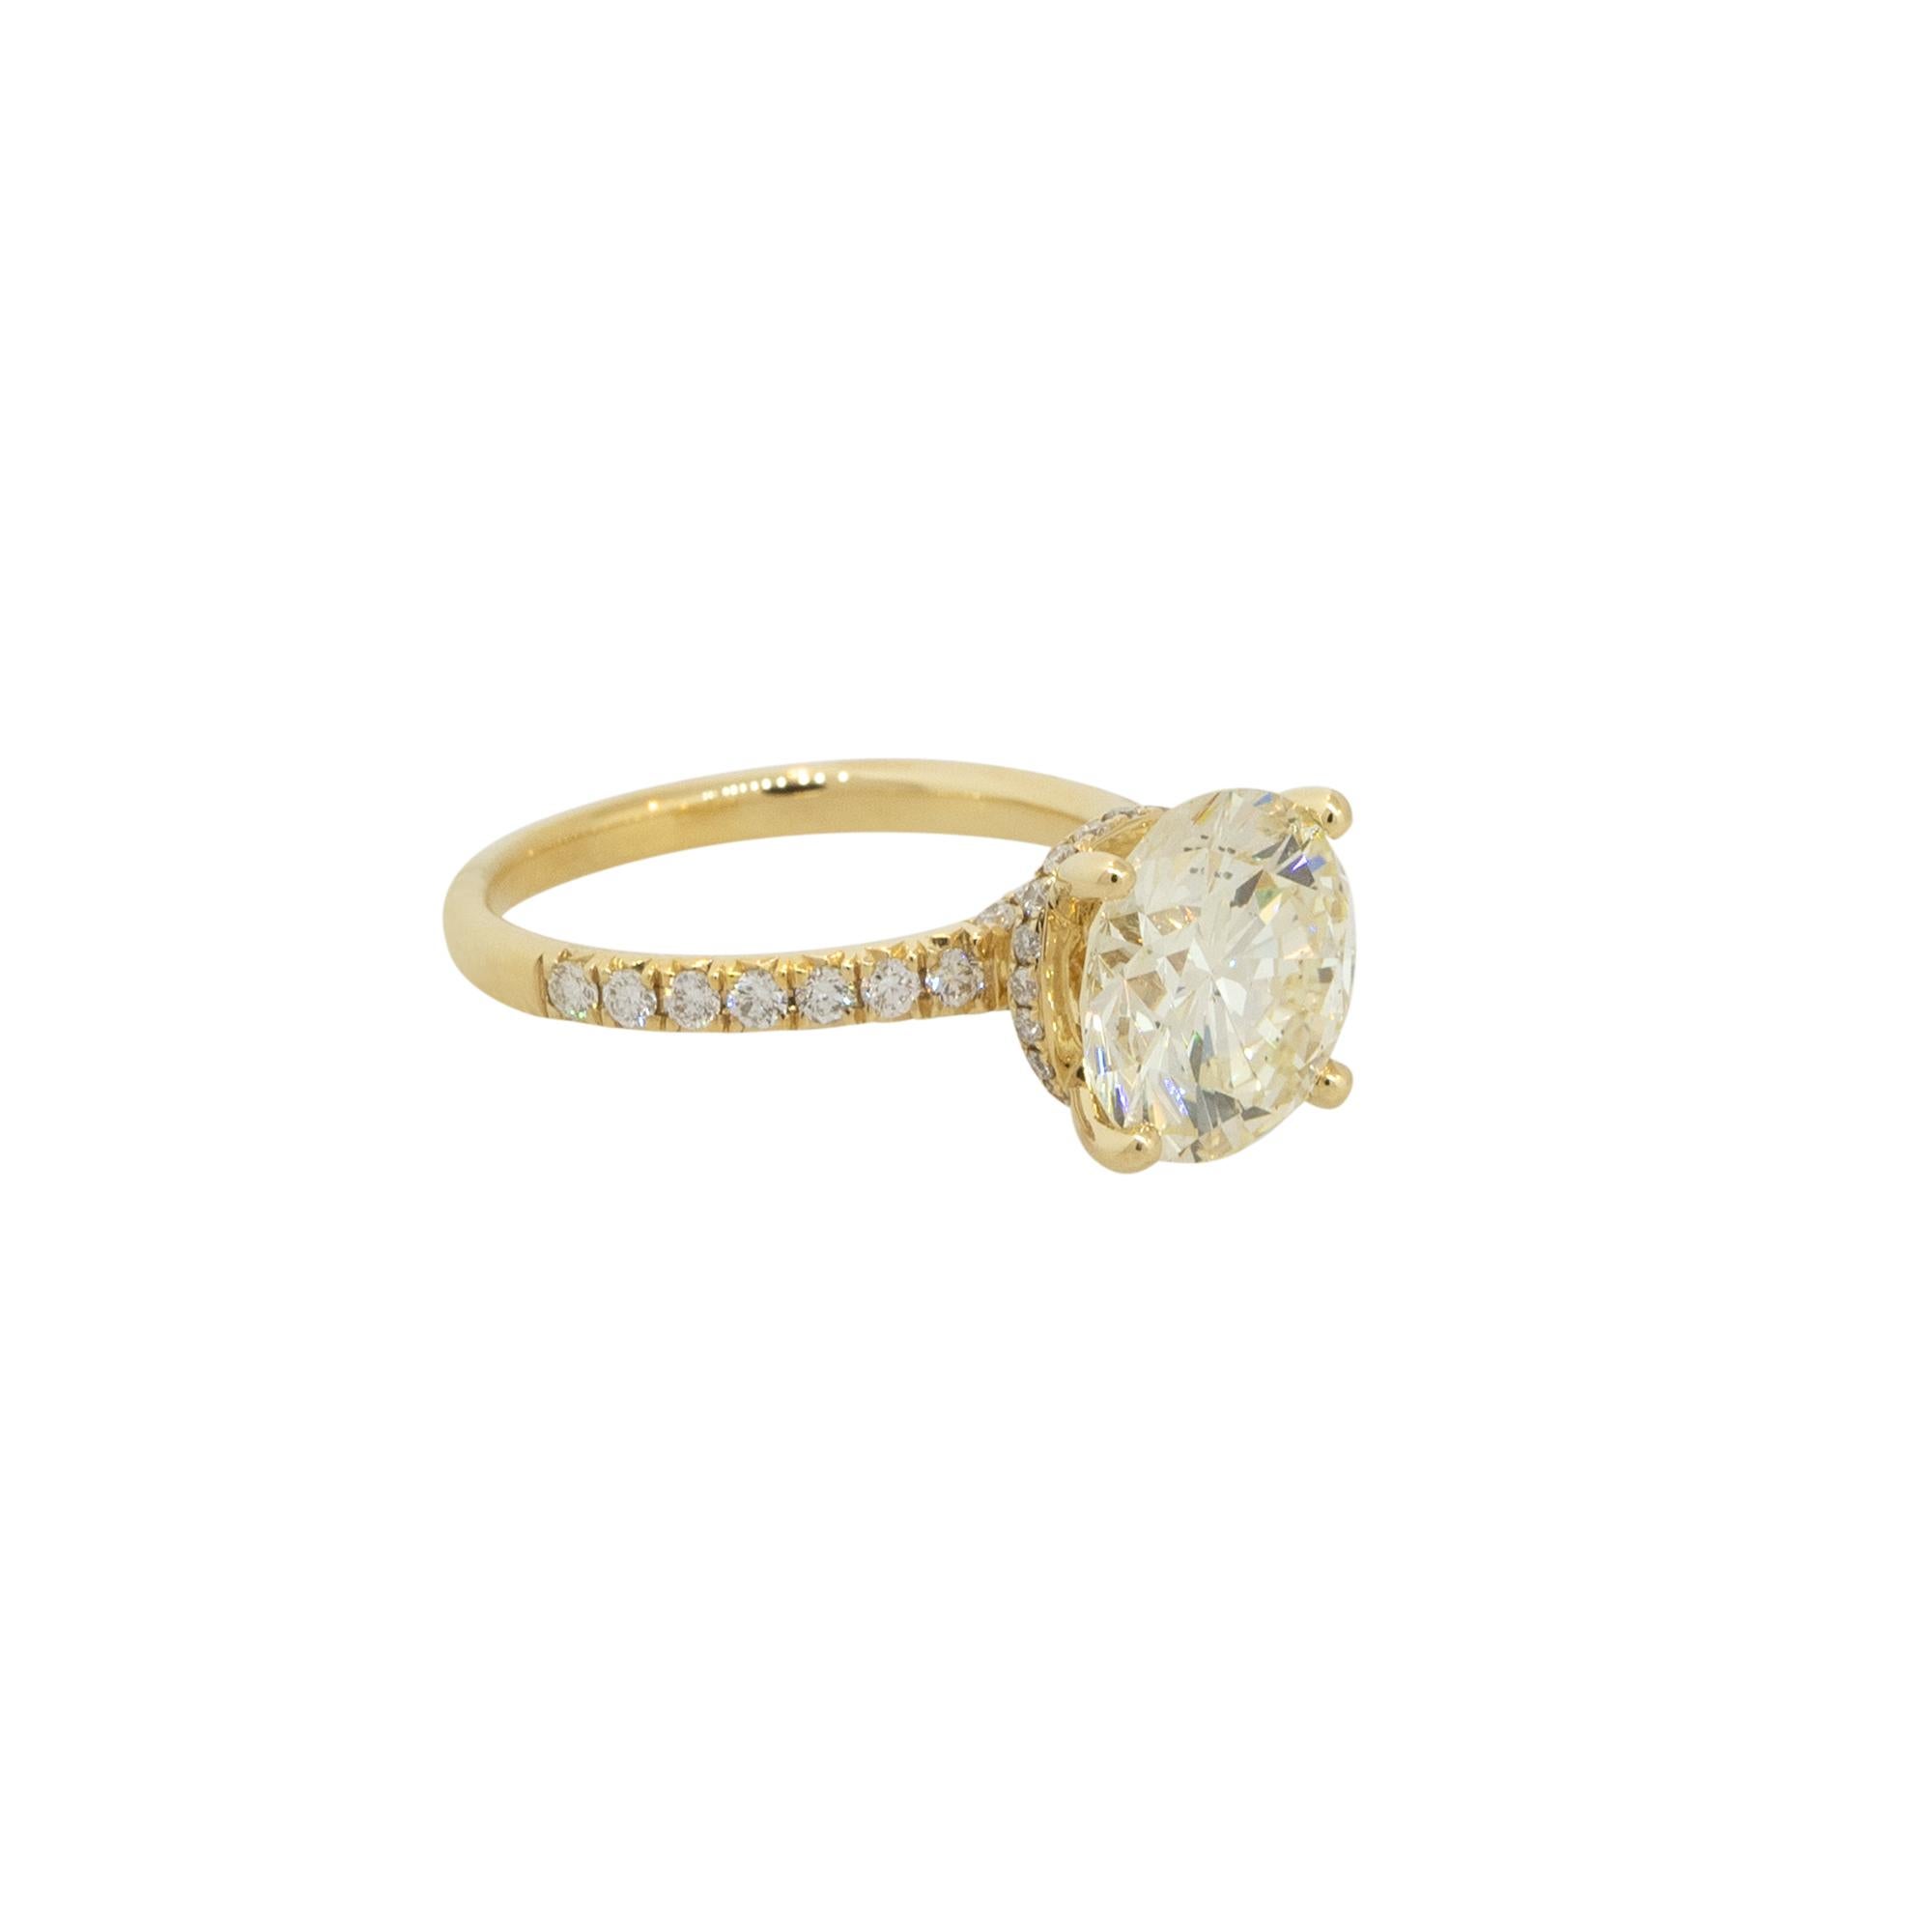 GIA Certified 18k Yellow Gold 4.47ctw Round Diamond Halo Engagement Ring

Material: 18k Yellow Gold
Center Diamond Details: Approx. 4.01ctw of Round Brilliant Cut Diamonds. Diamond is N in color and SI2 in clarity
GIA Cert #: 17444385
Mounting